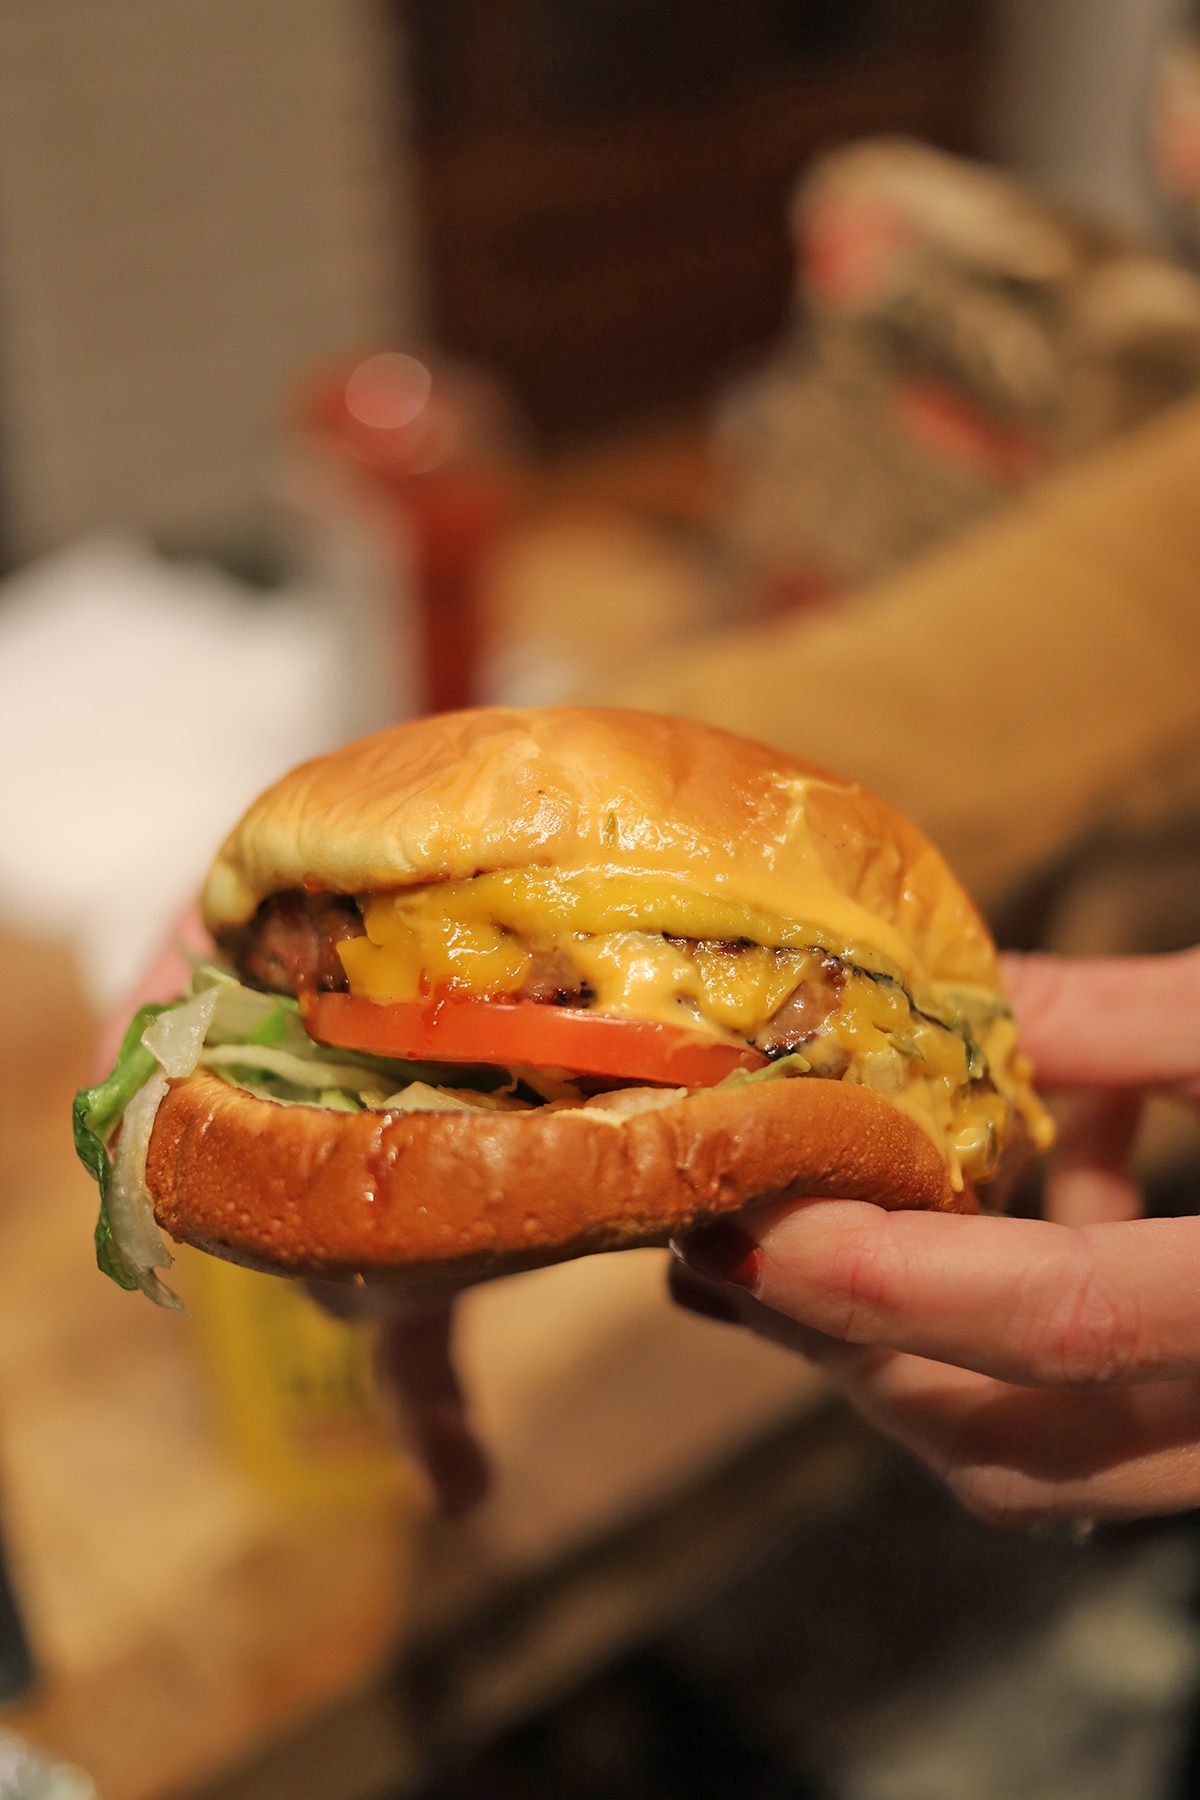 Hands holding burger with tomato slice.